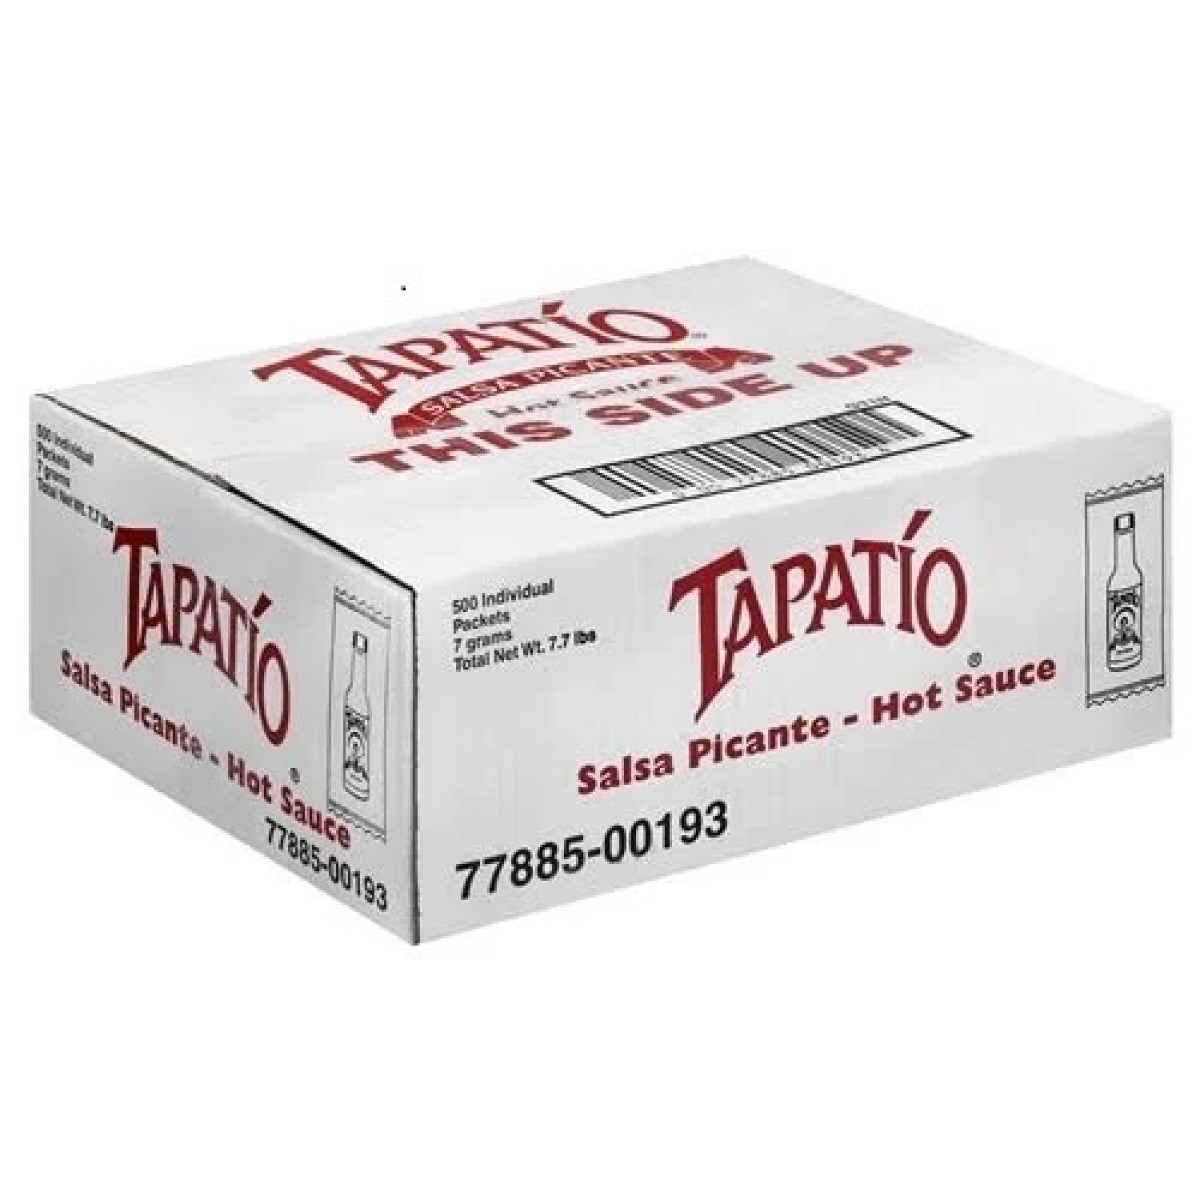 TAPATIO HOT SAUCE PACKETS